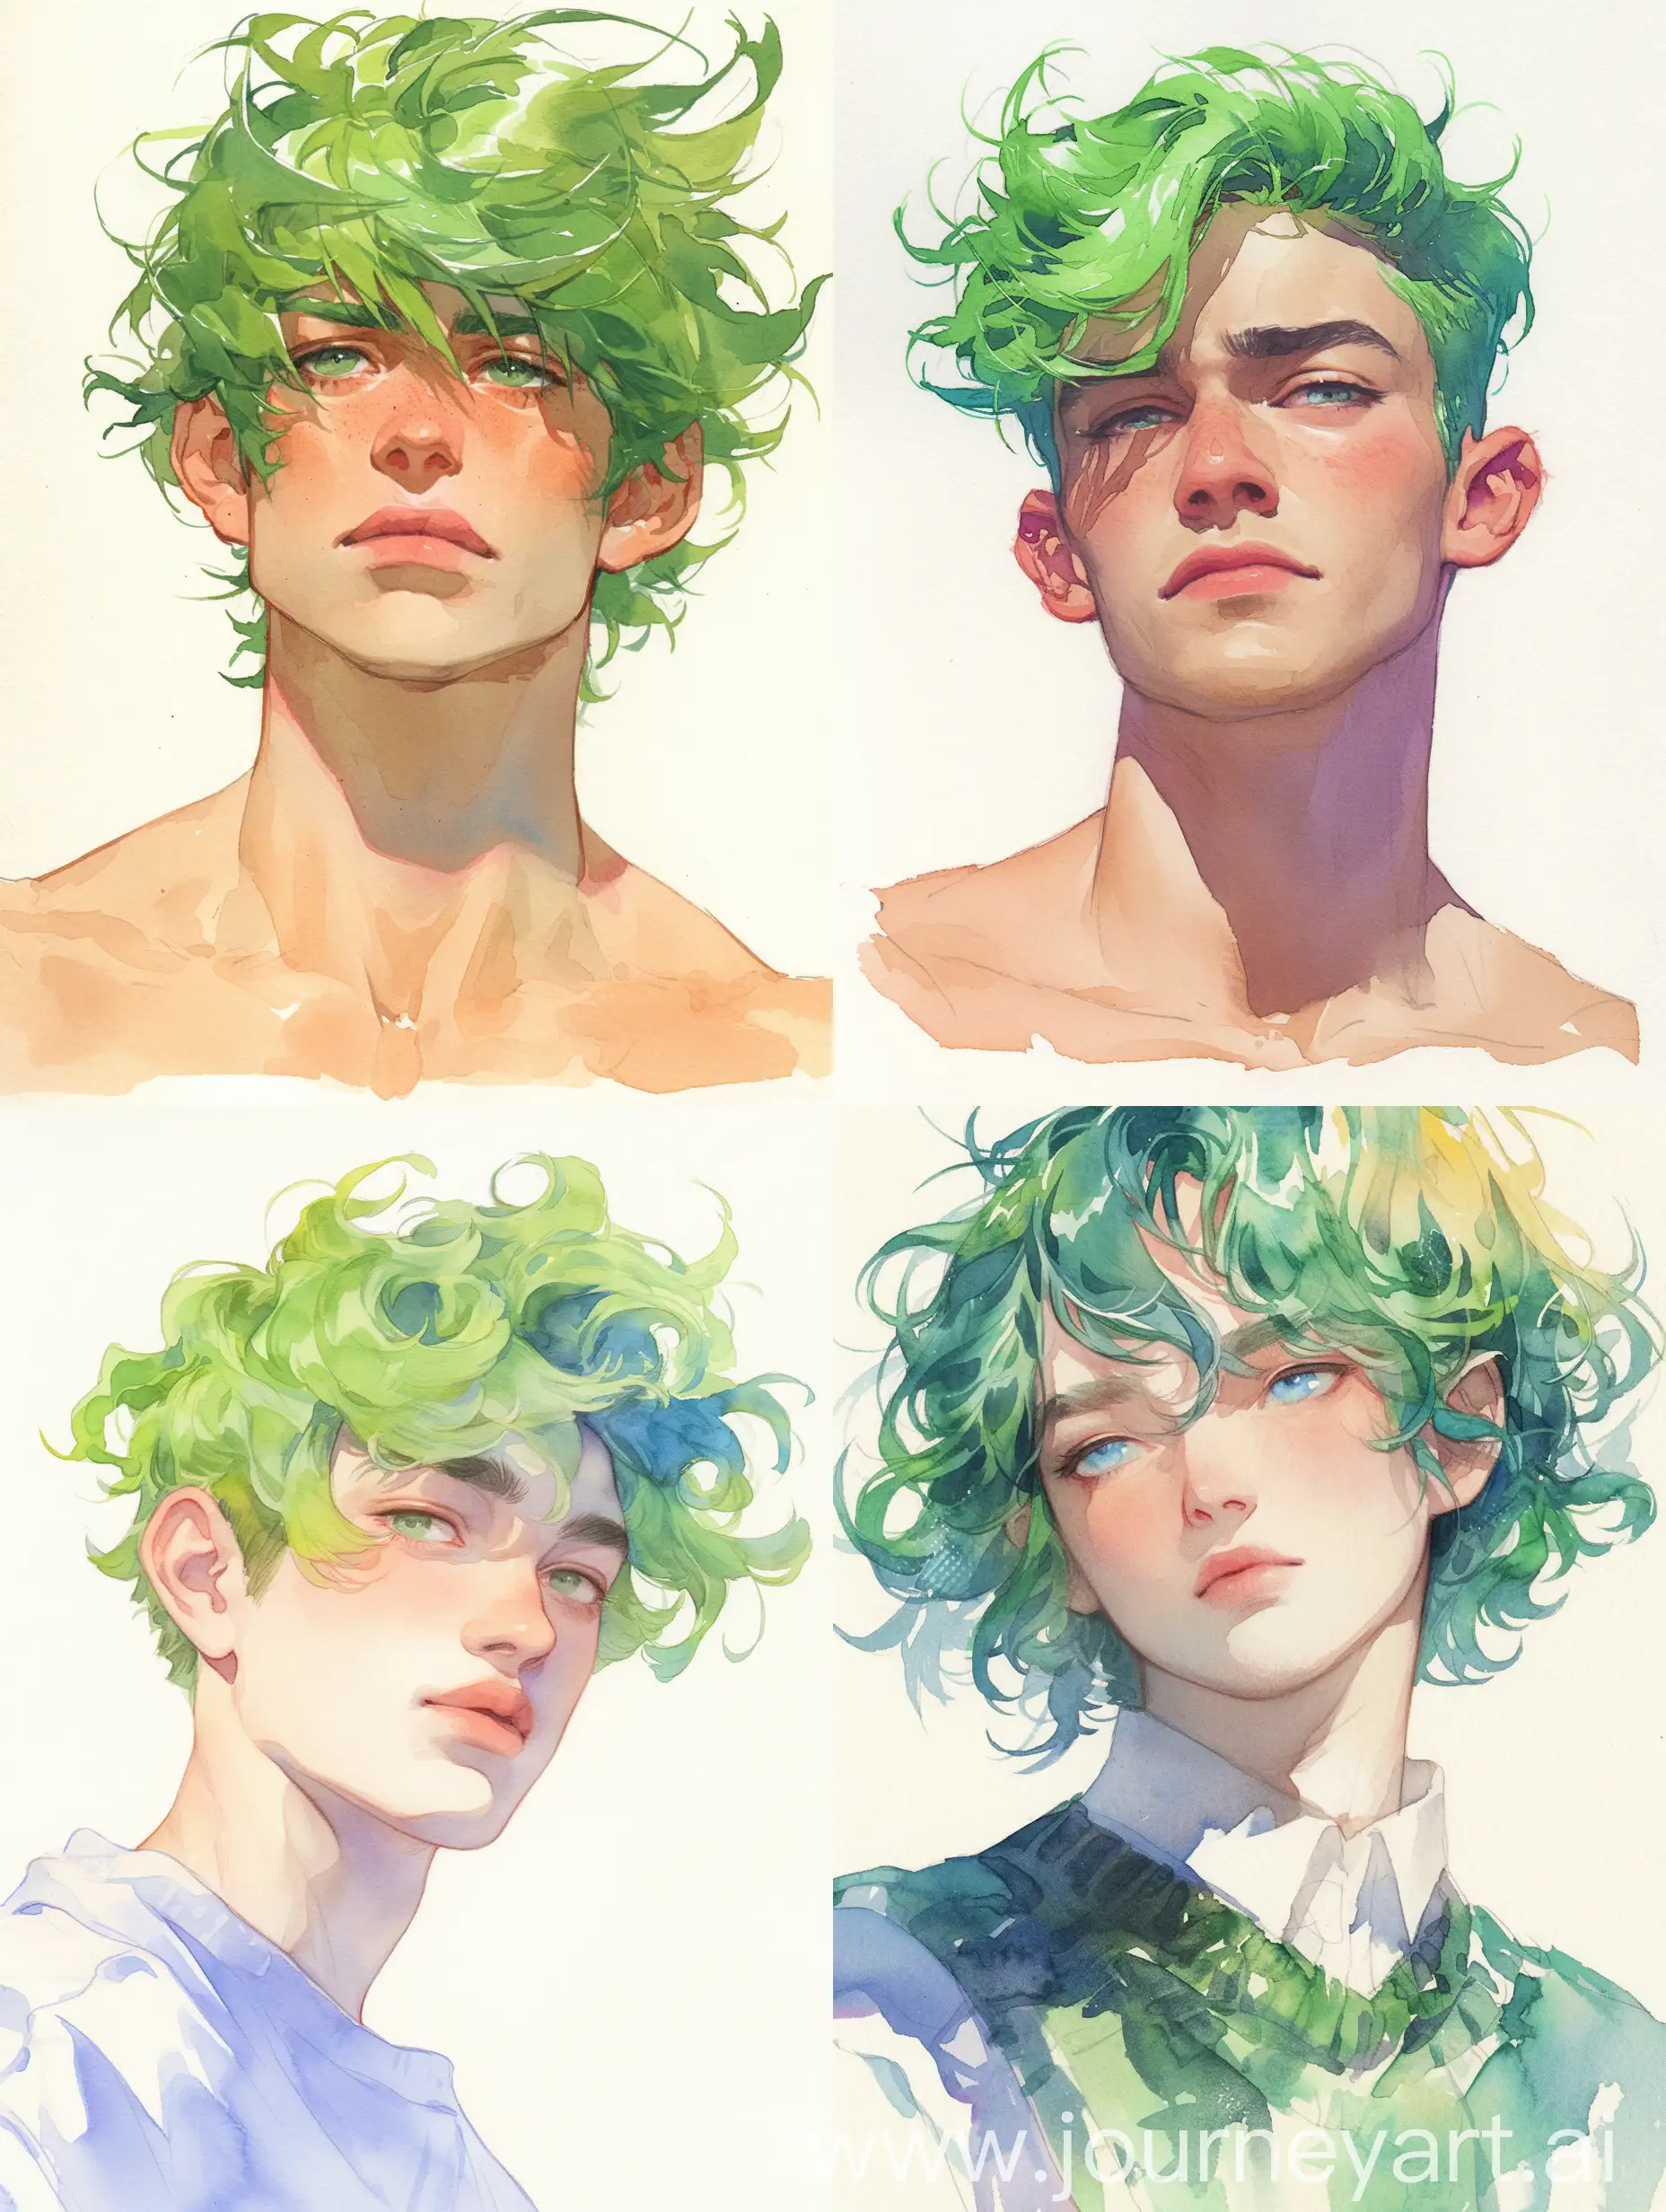 Watercolor-Portrait-of-a-GreenHaired-Man-from-Uranus